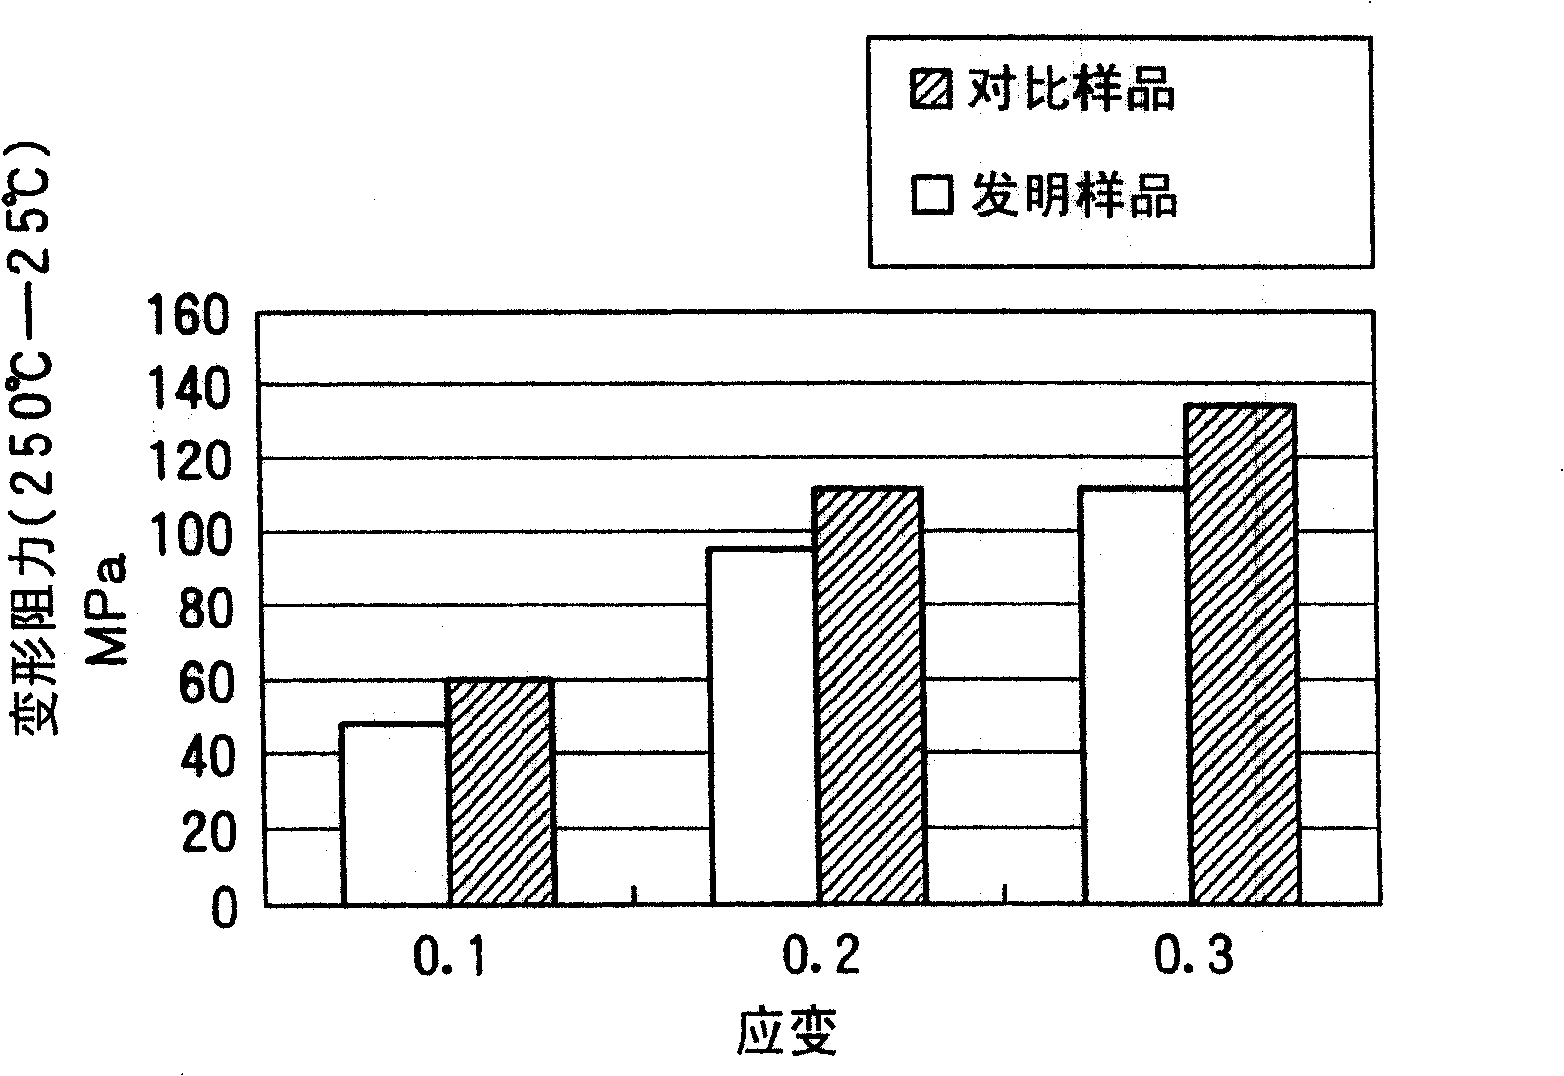 Low carbon composite free-cutting steel product excellent in roughness of finished surface and method for production thereof